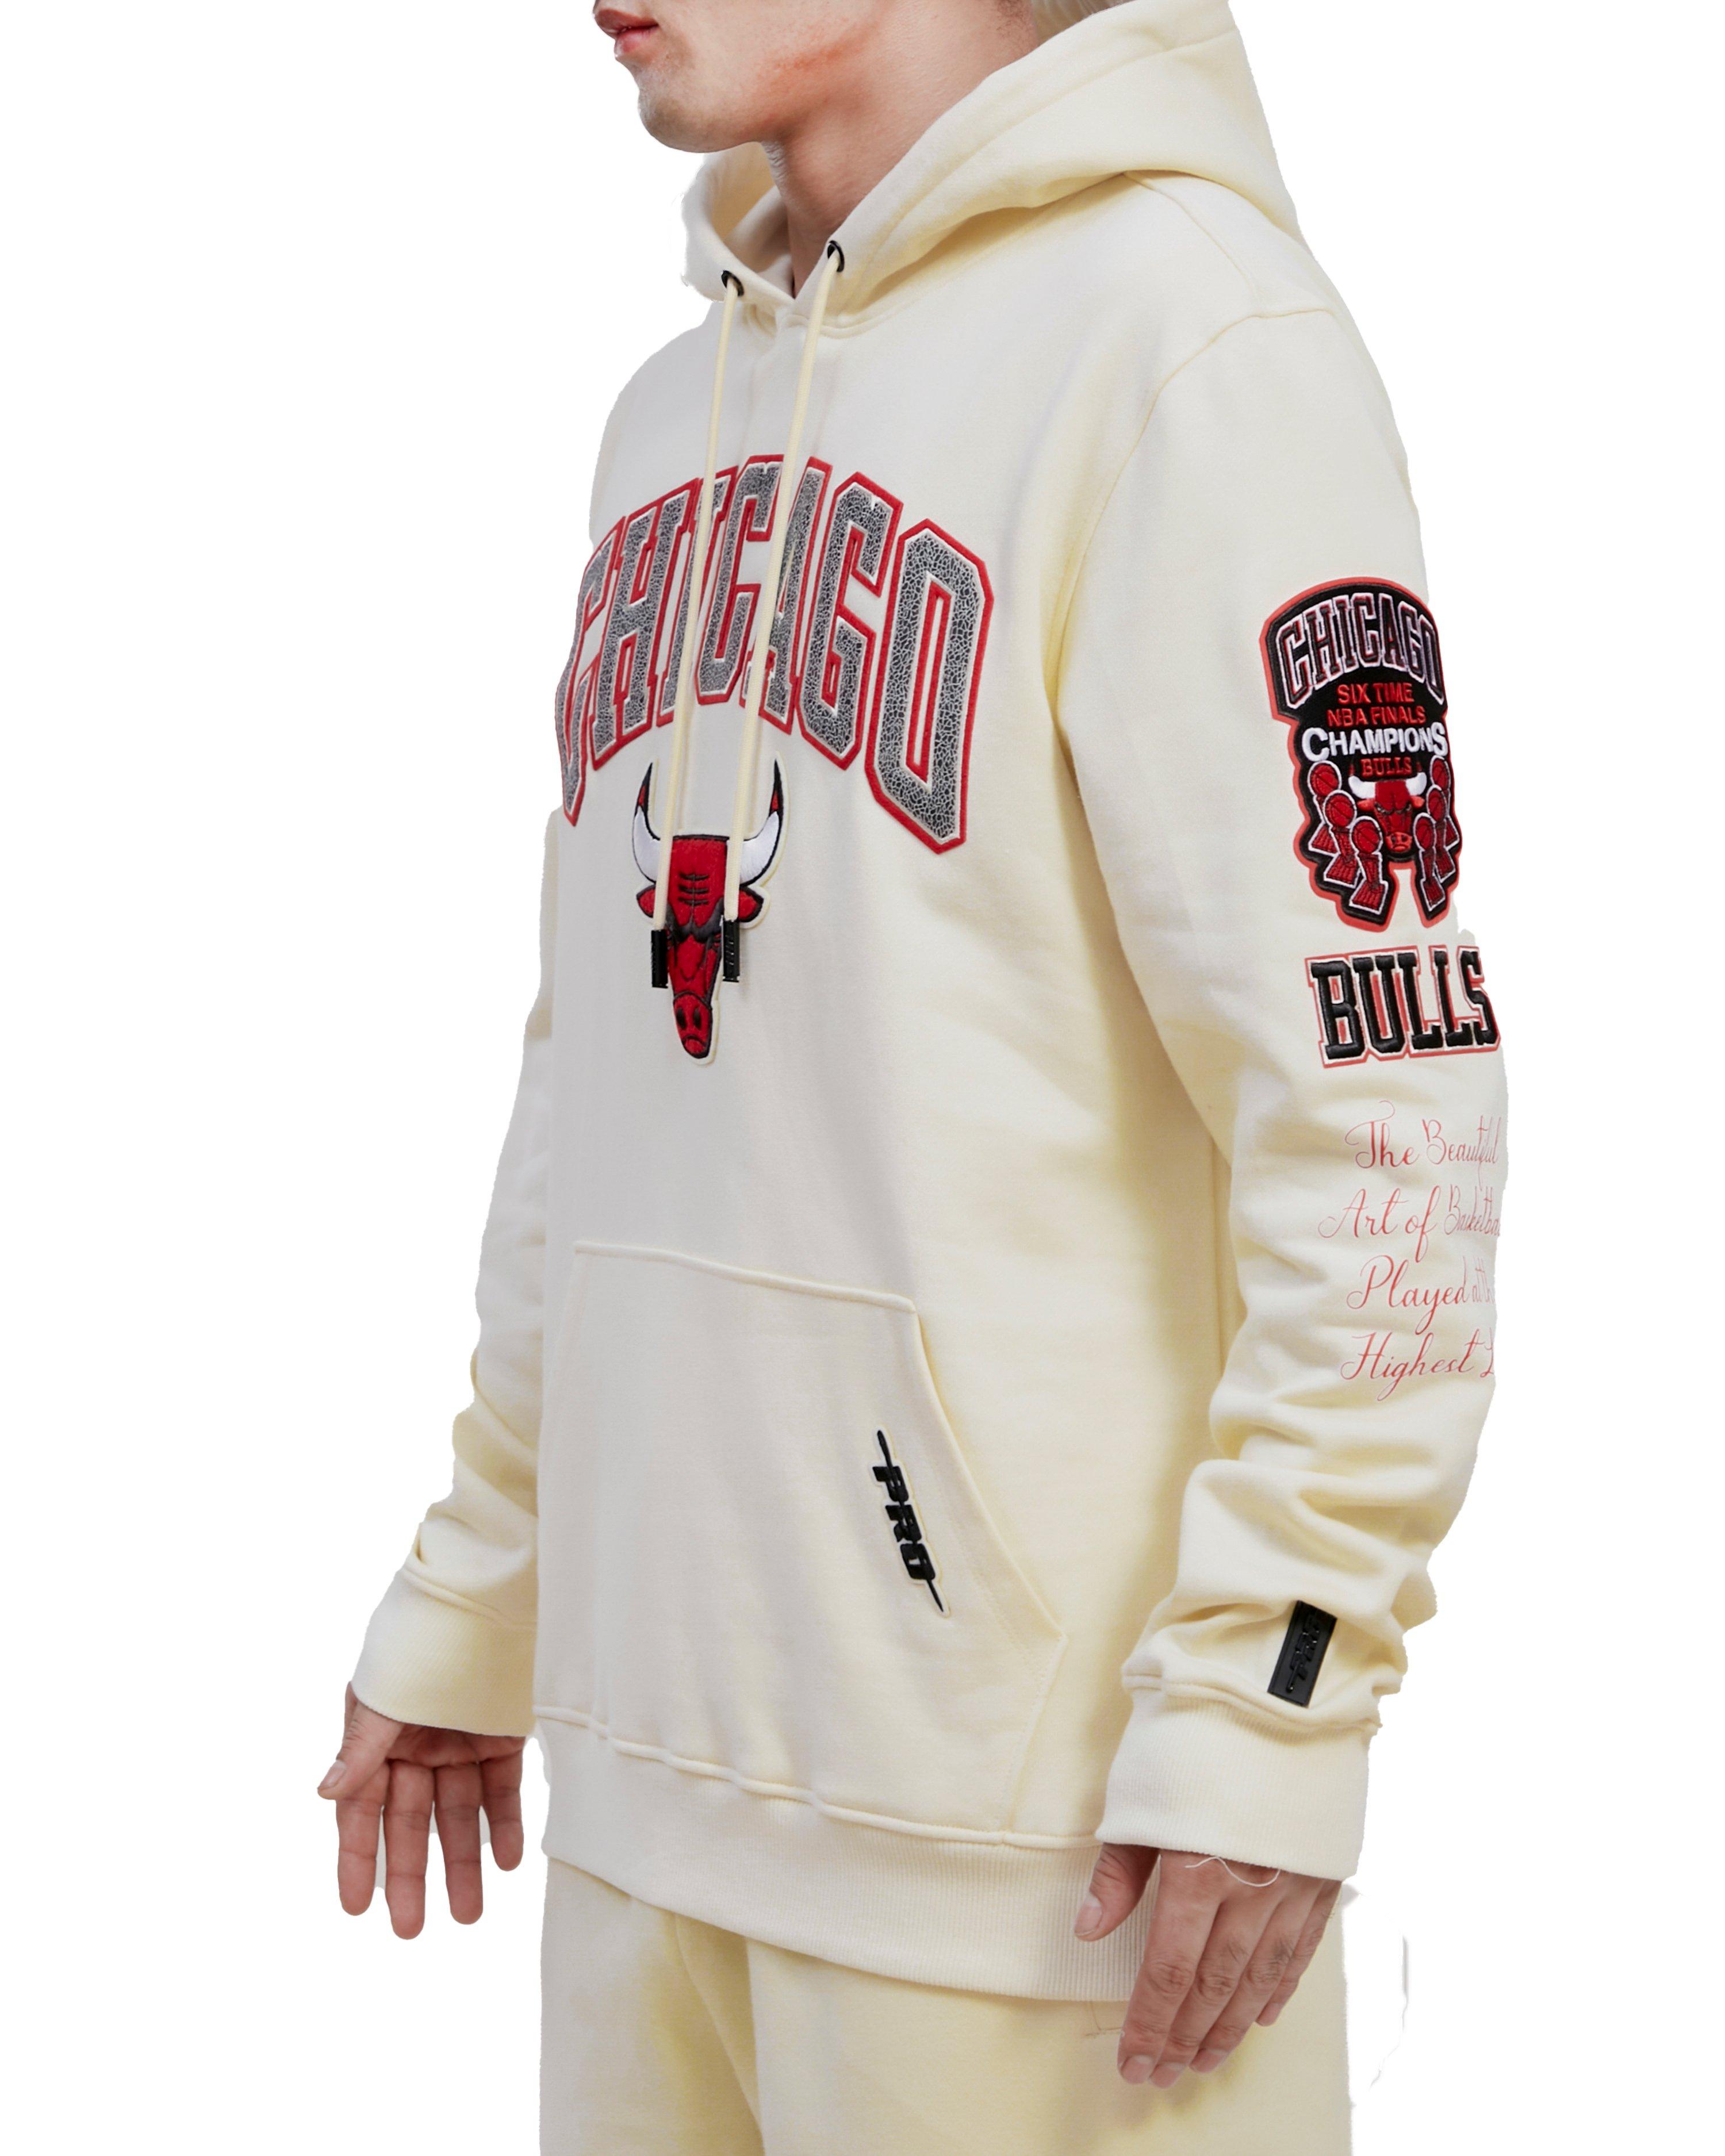 Chicago Bulls Mitchell & Ness Six Rings Pullover Hoodie - Black